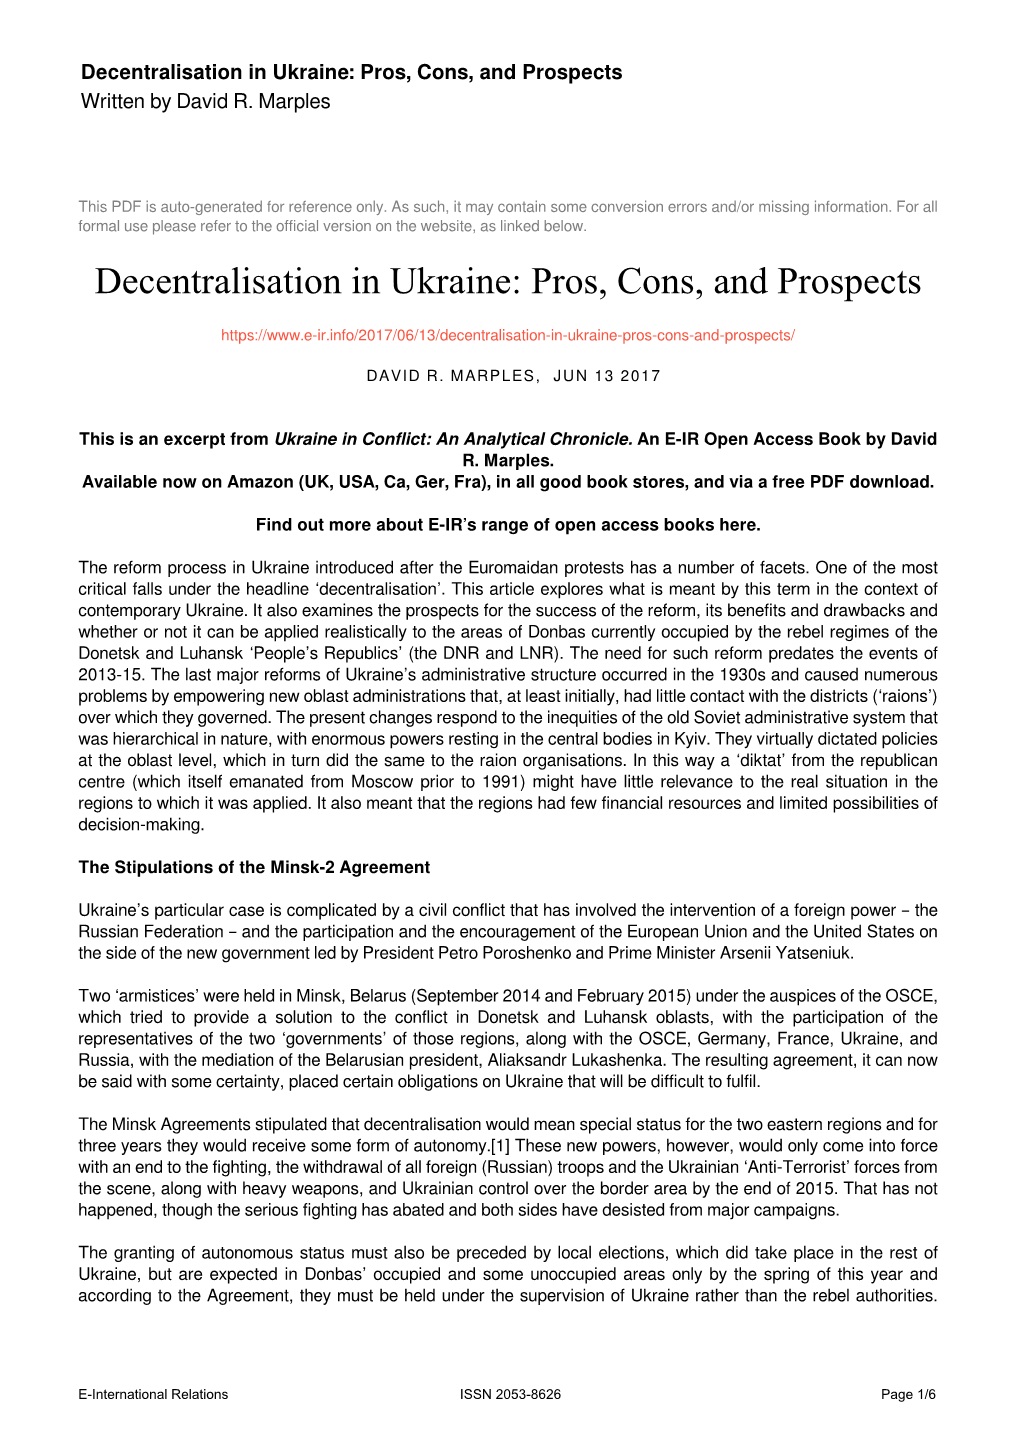 Decentralisation in Ukraine: Pros, Cons, and Prospects Written by David R